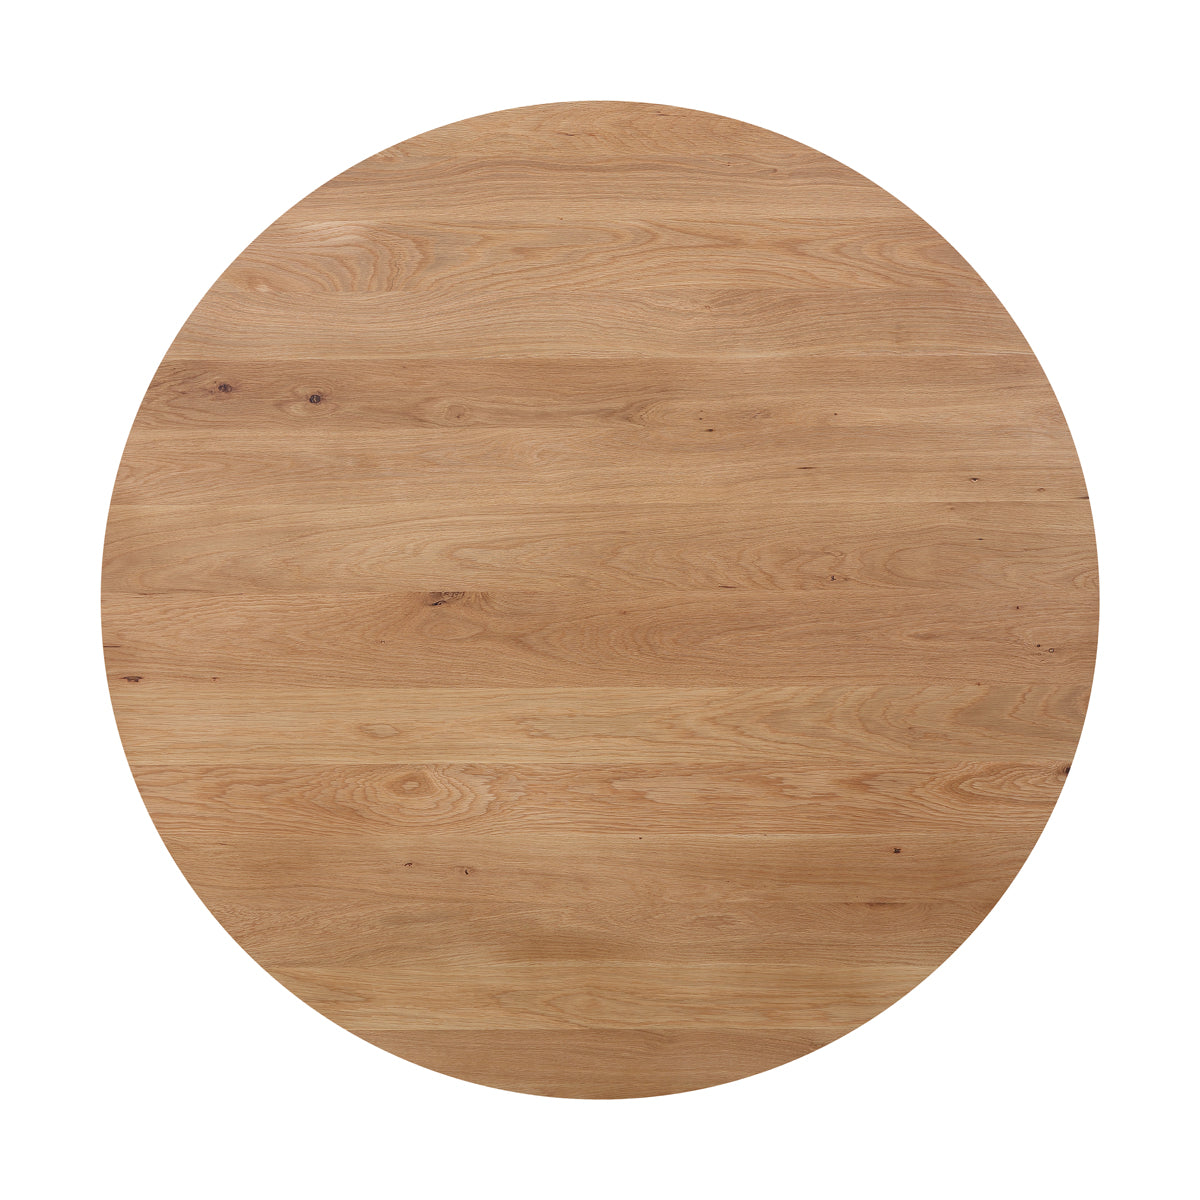 Formation Dining Table, Seats 4-5 People, White Oak - Image 4